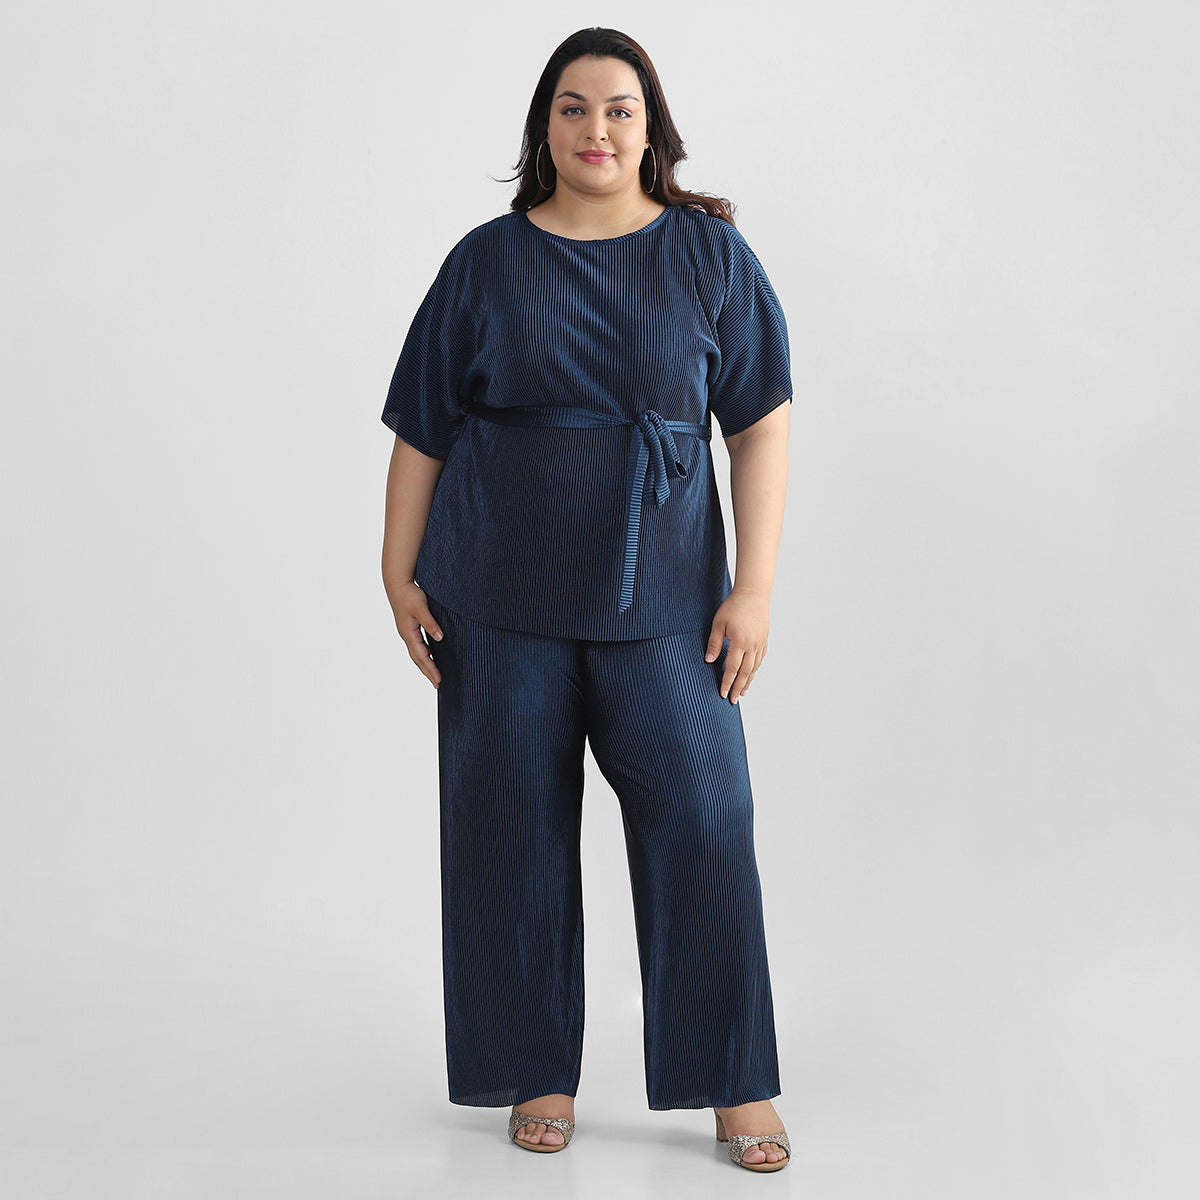 Women Co-ord Sets Plus Size - Calae